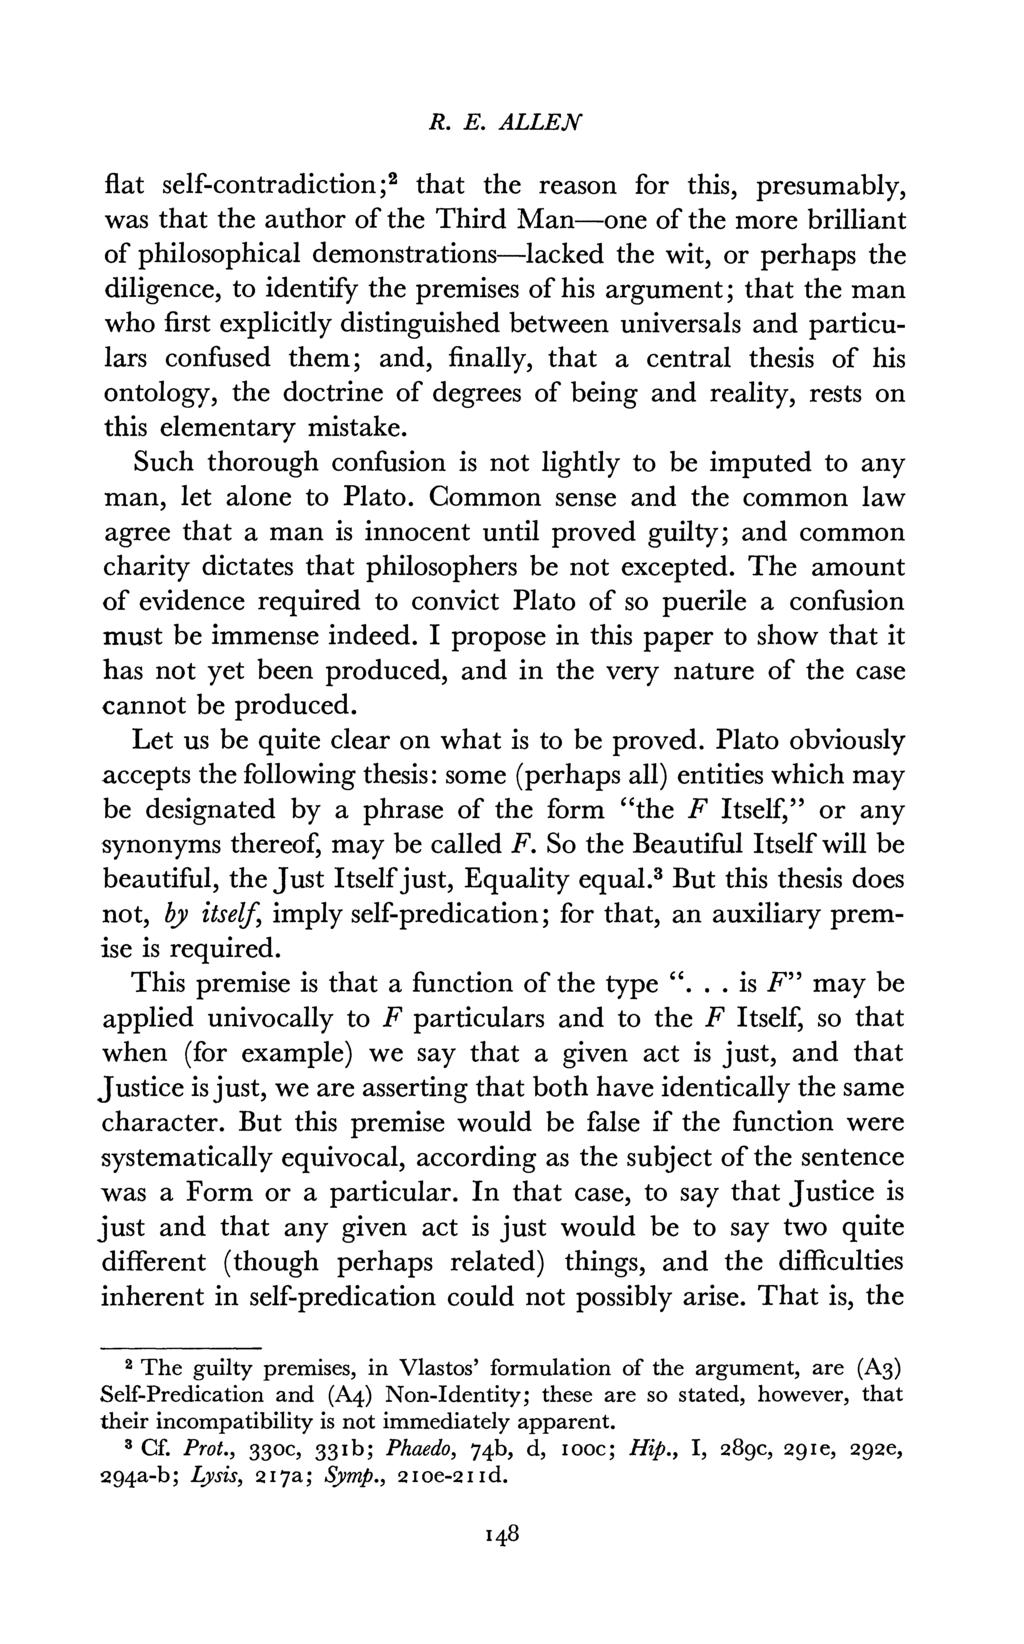 R. E. ALLEN flat self-contradiction;2 that the reason for this, presumably, was that the author of the Third Man-one of the more brilliant of philosophical demonstrations-lacked the wit, or perhaps